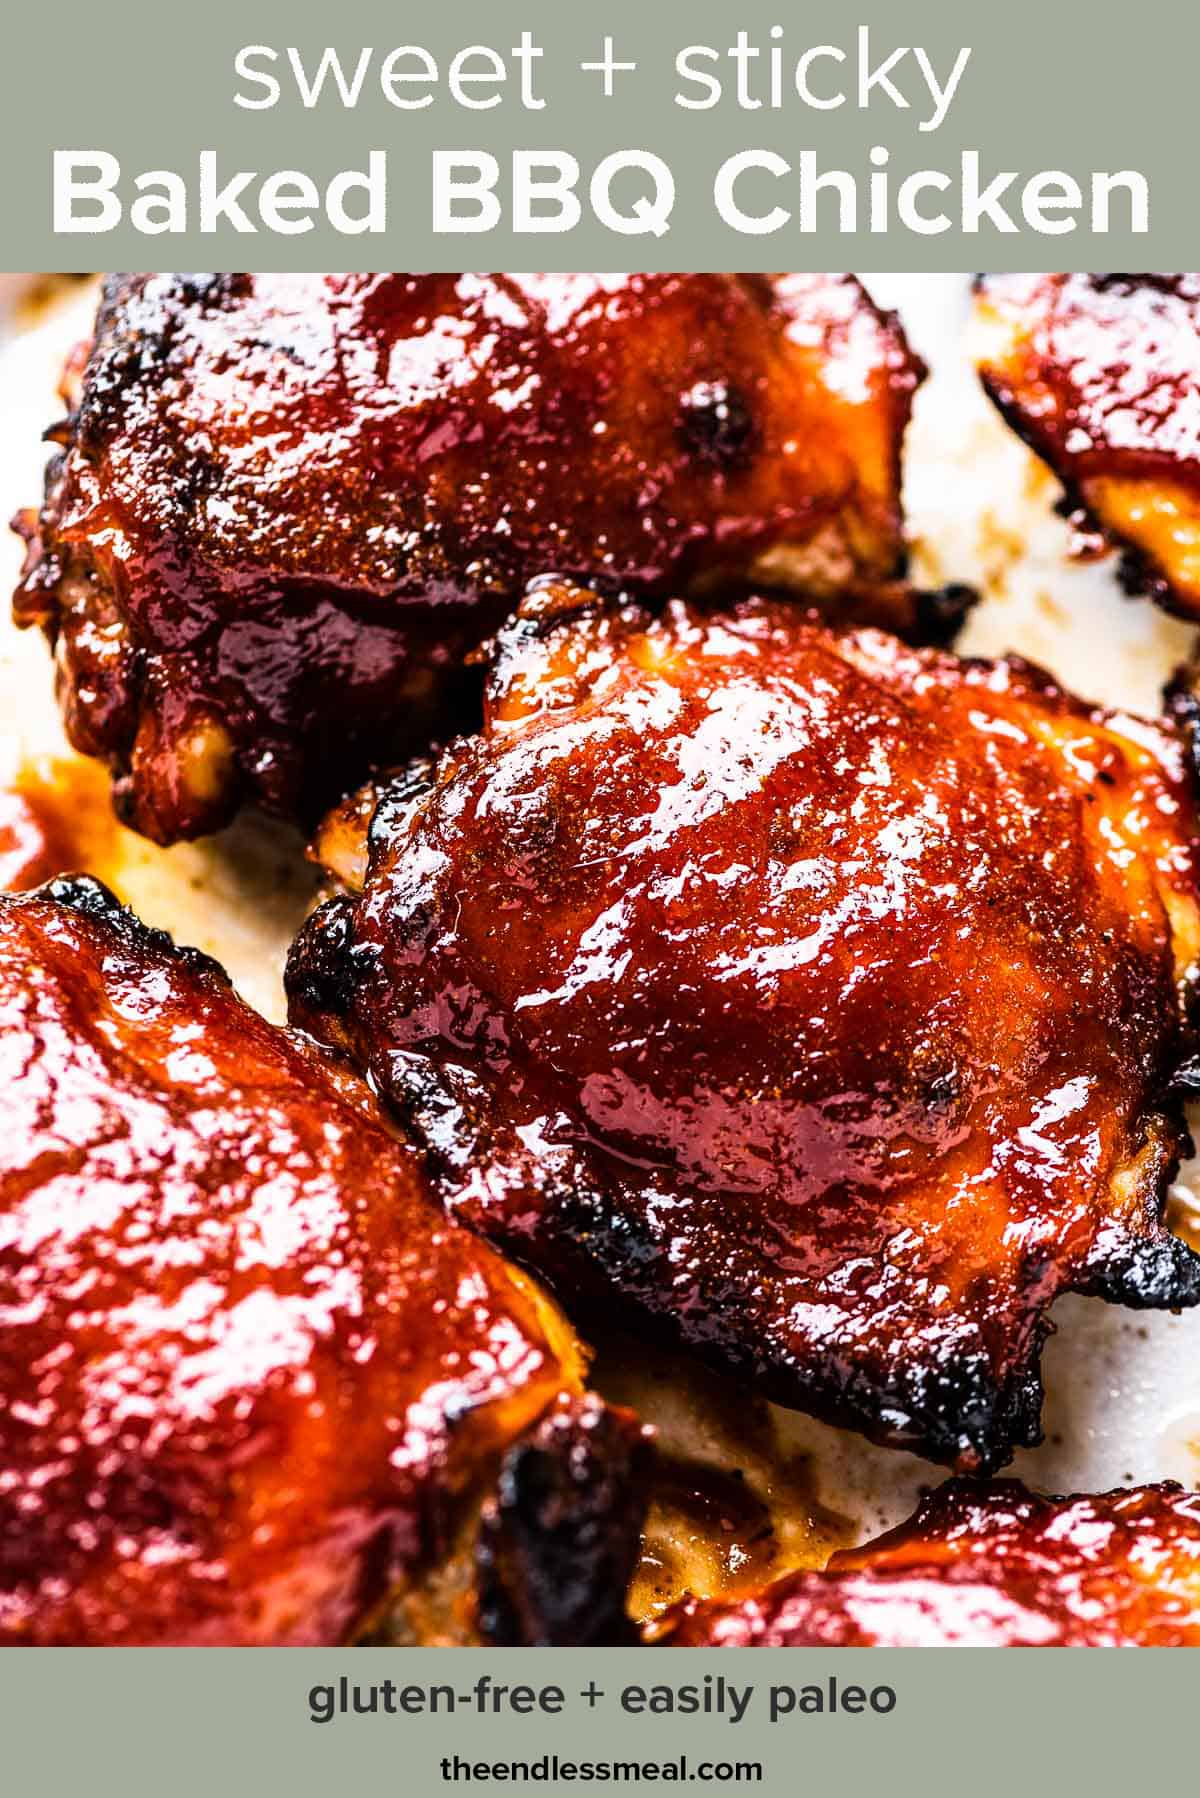 Baked BBQ chicken on a baking sheet with the recipe title on top of the picture.